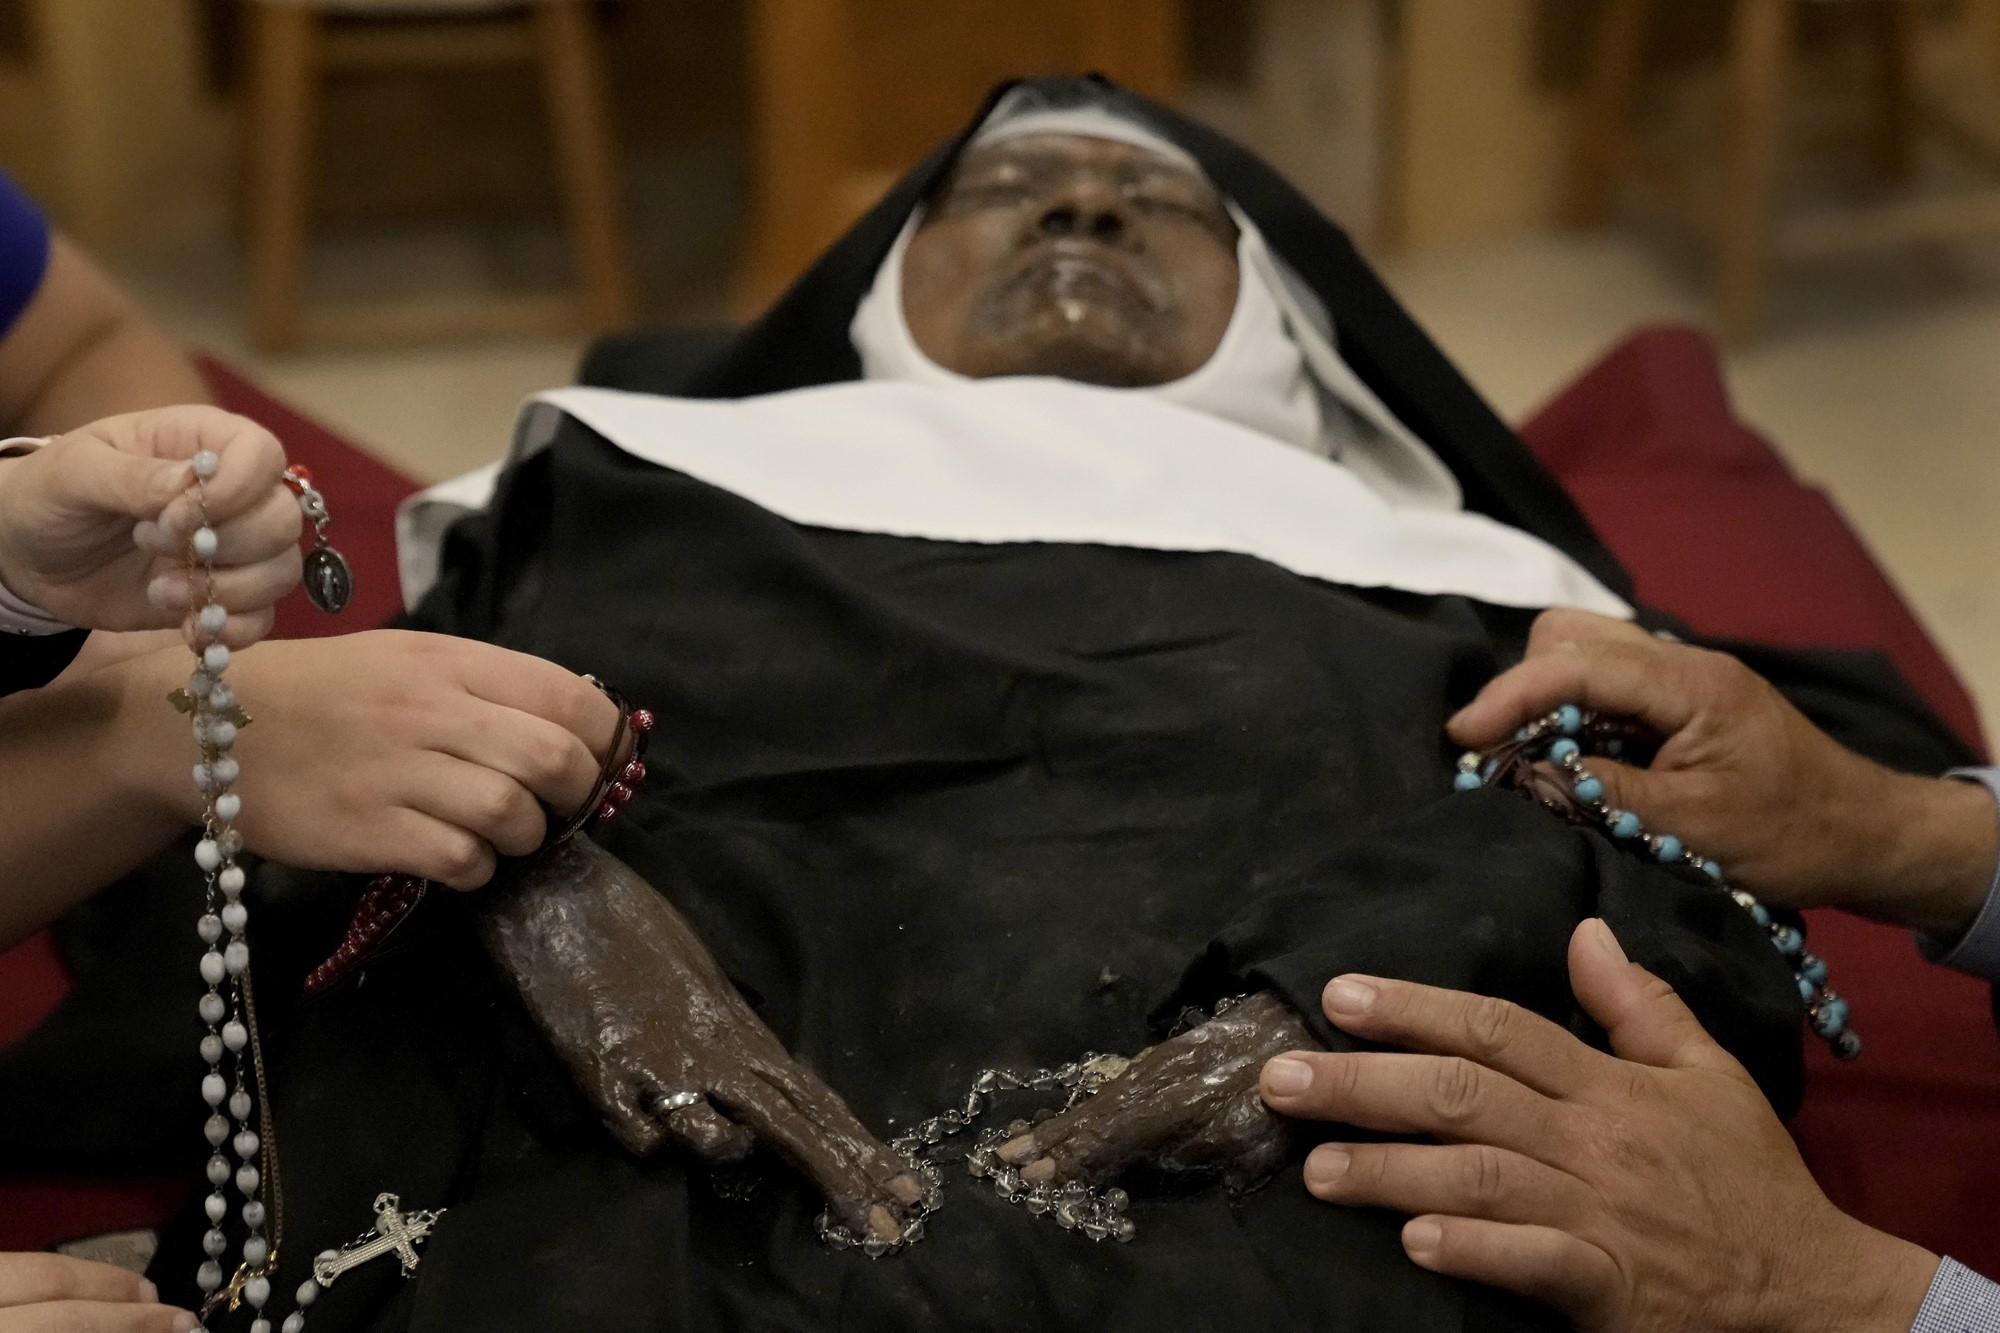 A black nun's body lies in state, with other people's hands touching her and holding rosary beads